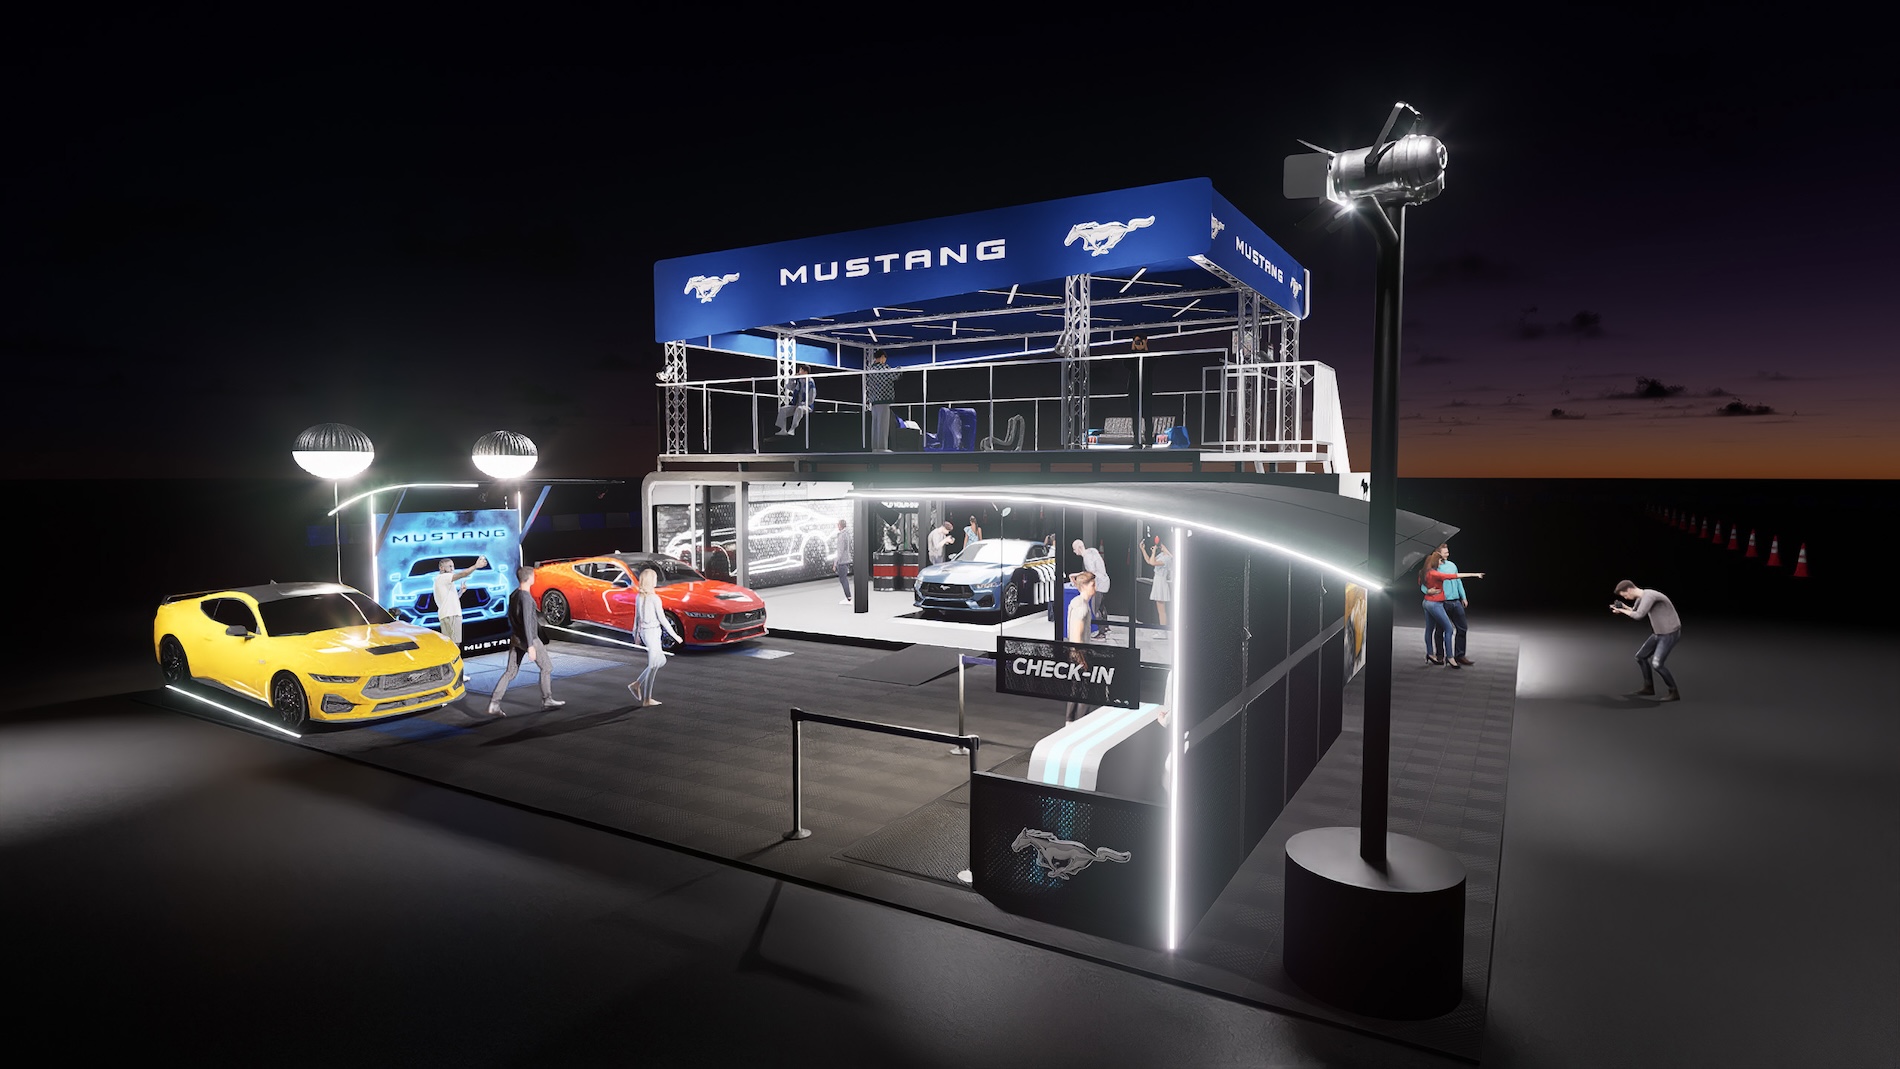 S650 Mustang "Mustang Unleashed" national demo tour announced to celebrate Mustang's 60th Birthday. Registration now open Mustang Unleashed Render 7